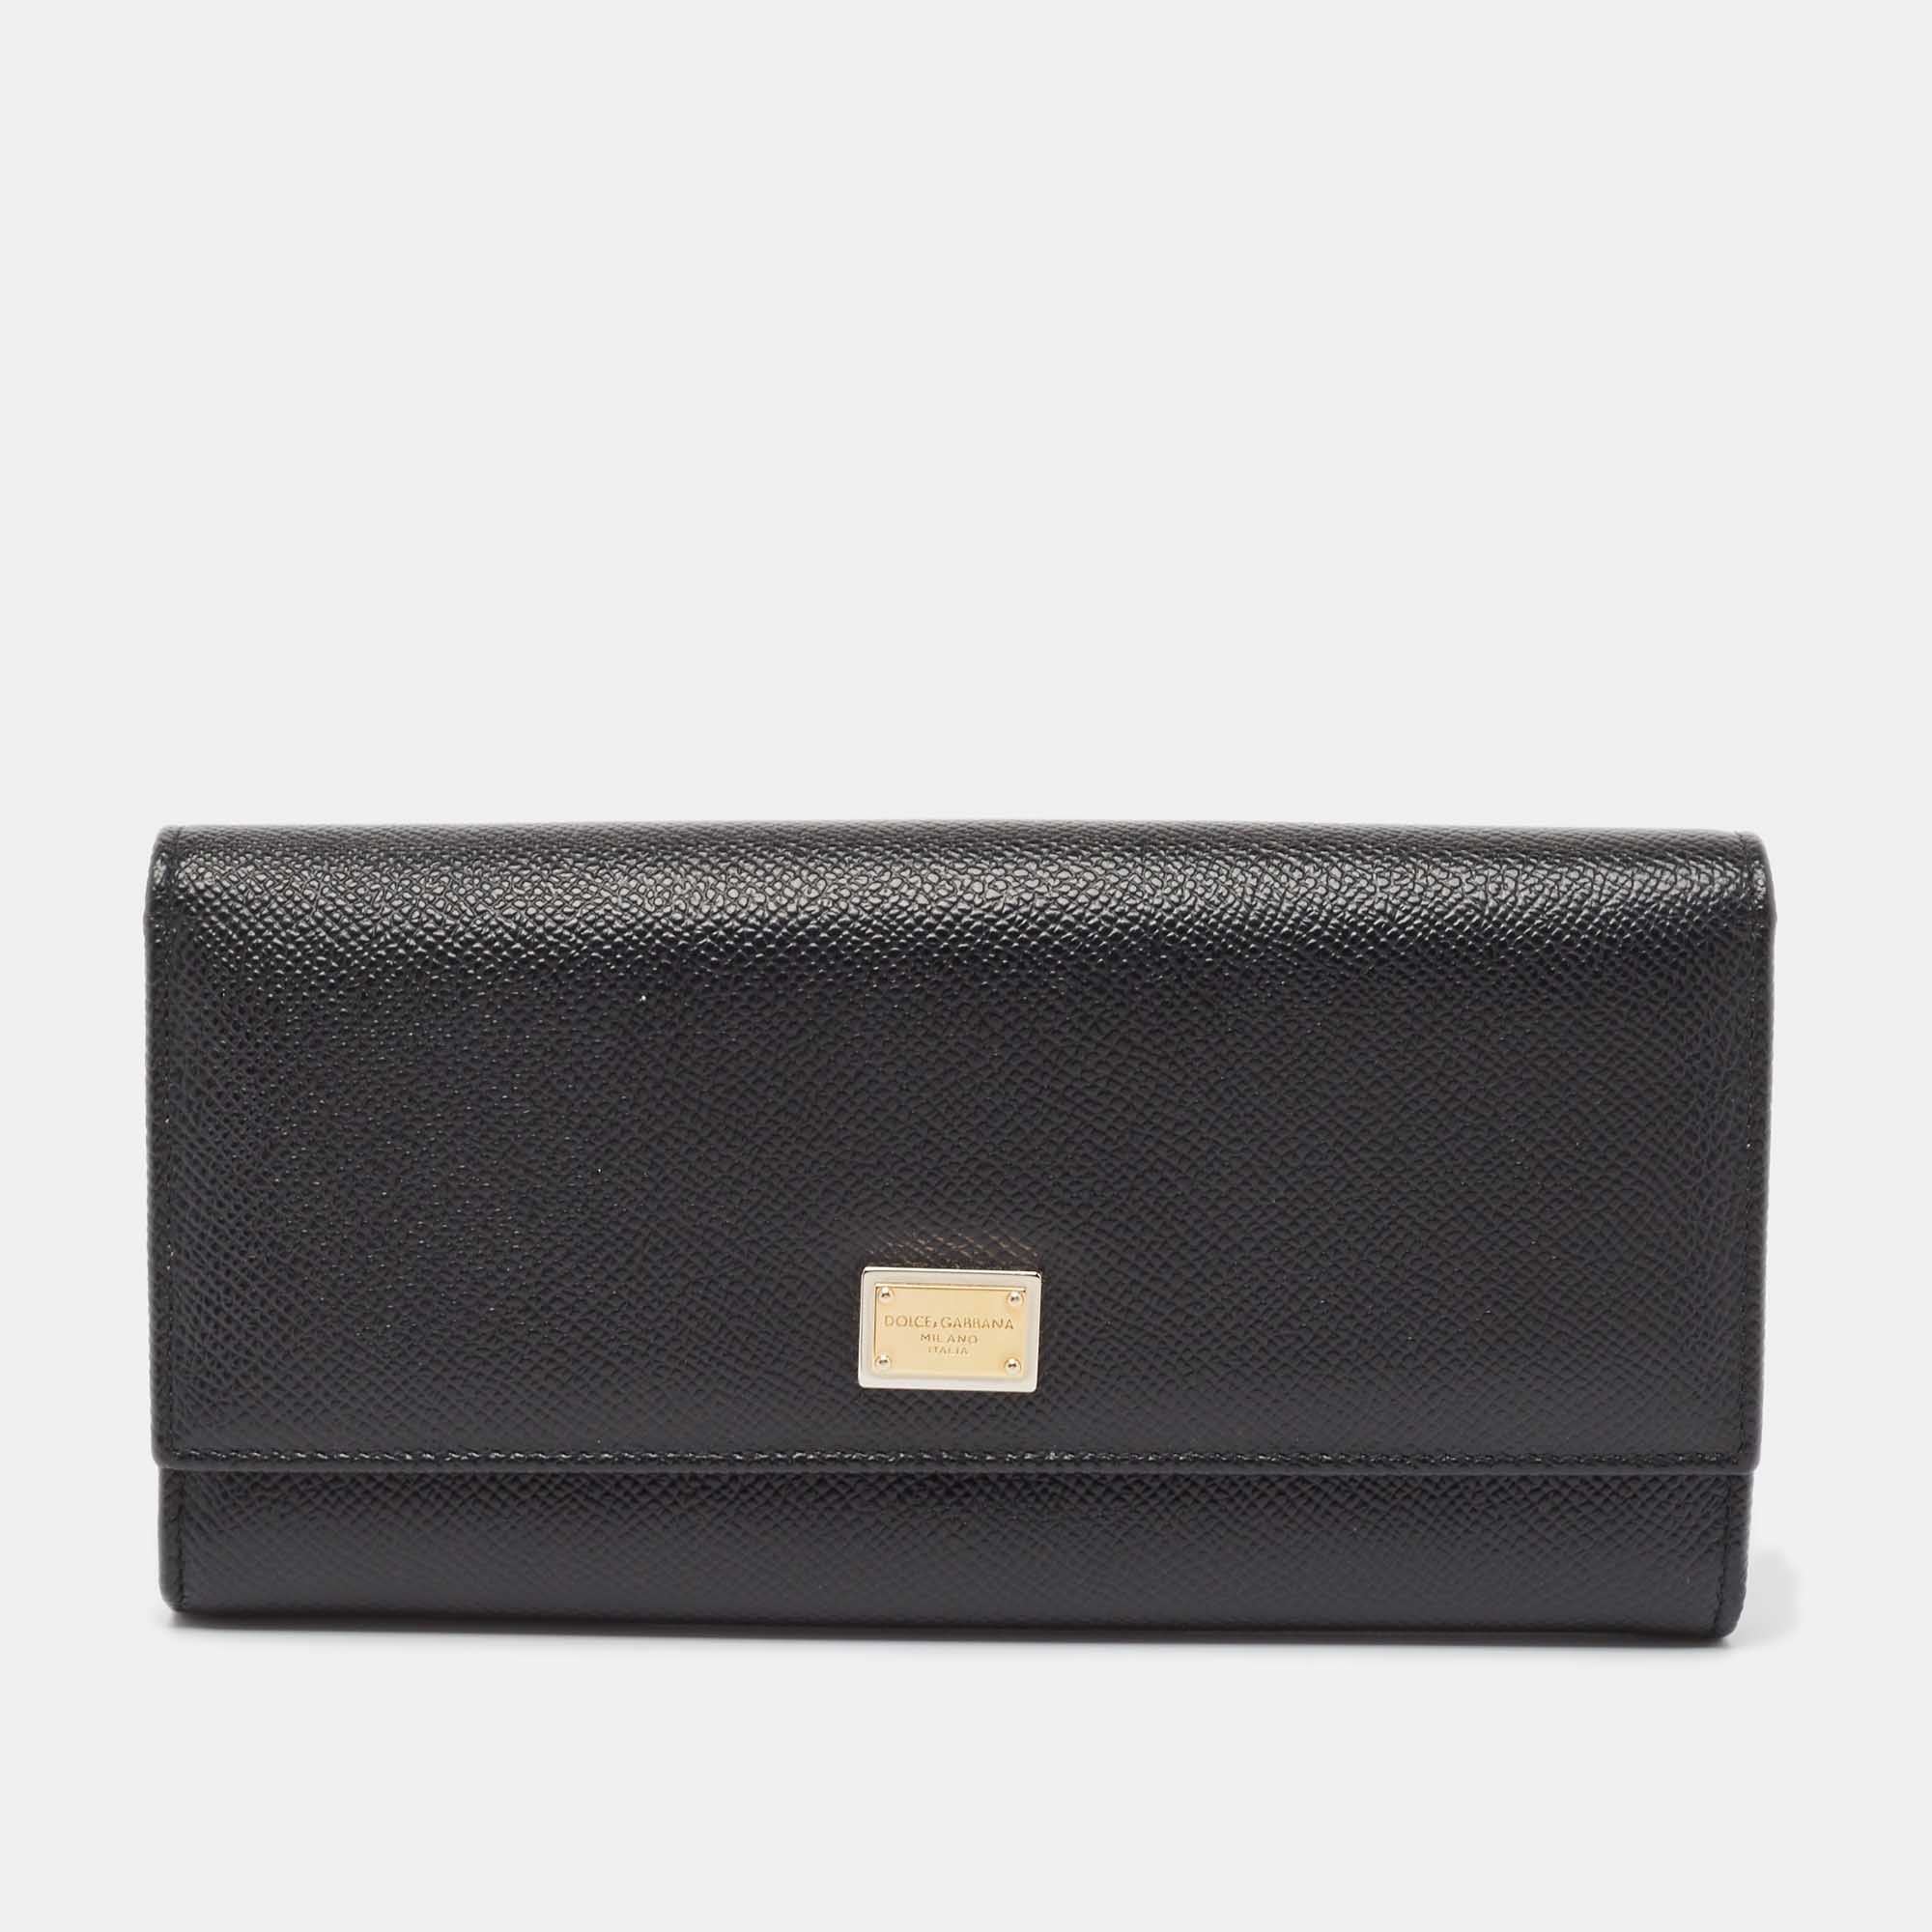 Pre-owned Dolce & Gabbana Black Leather Flap Continental Wallet